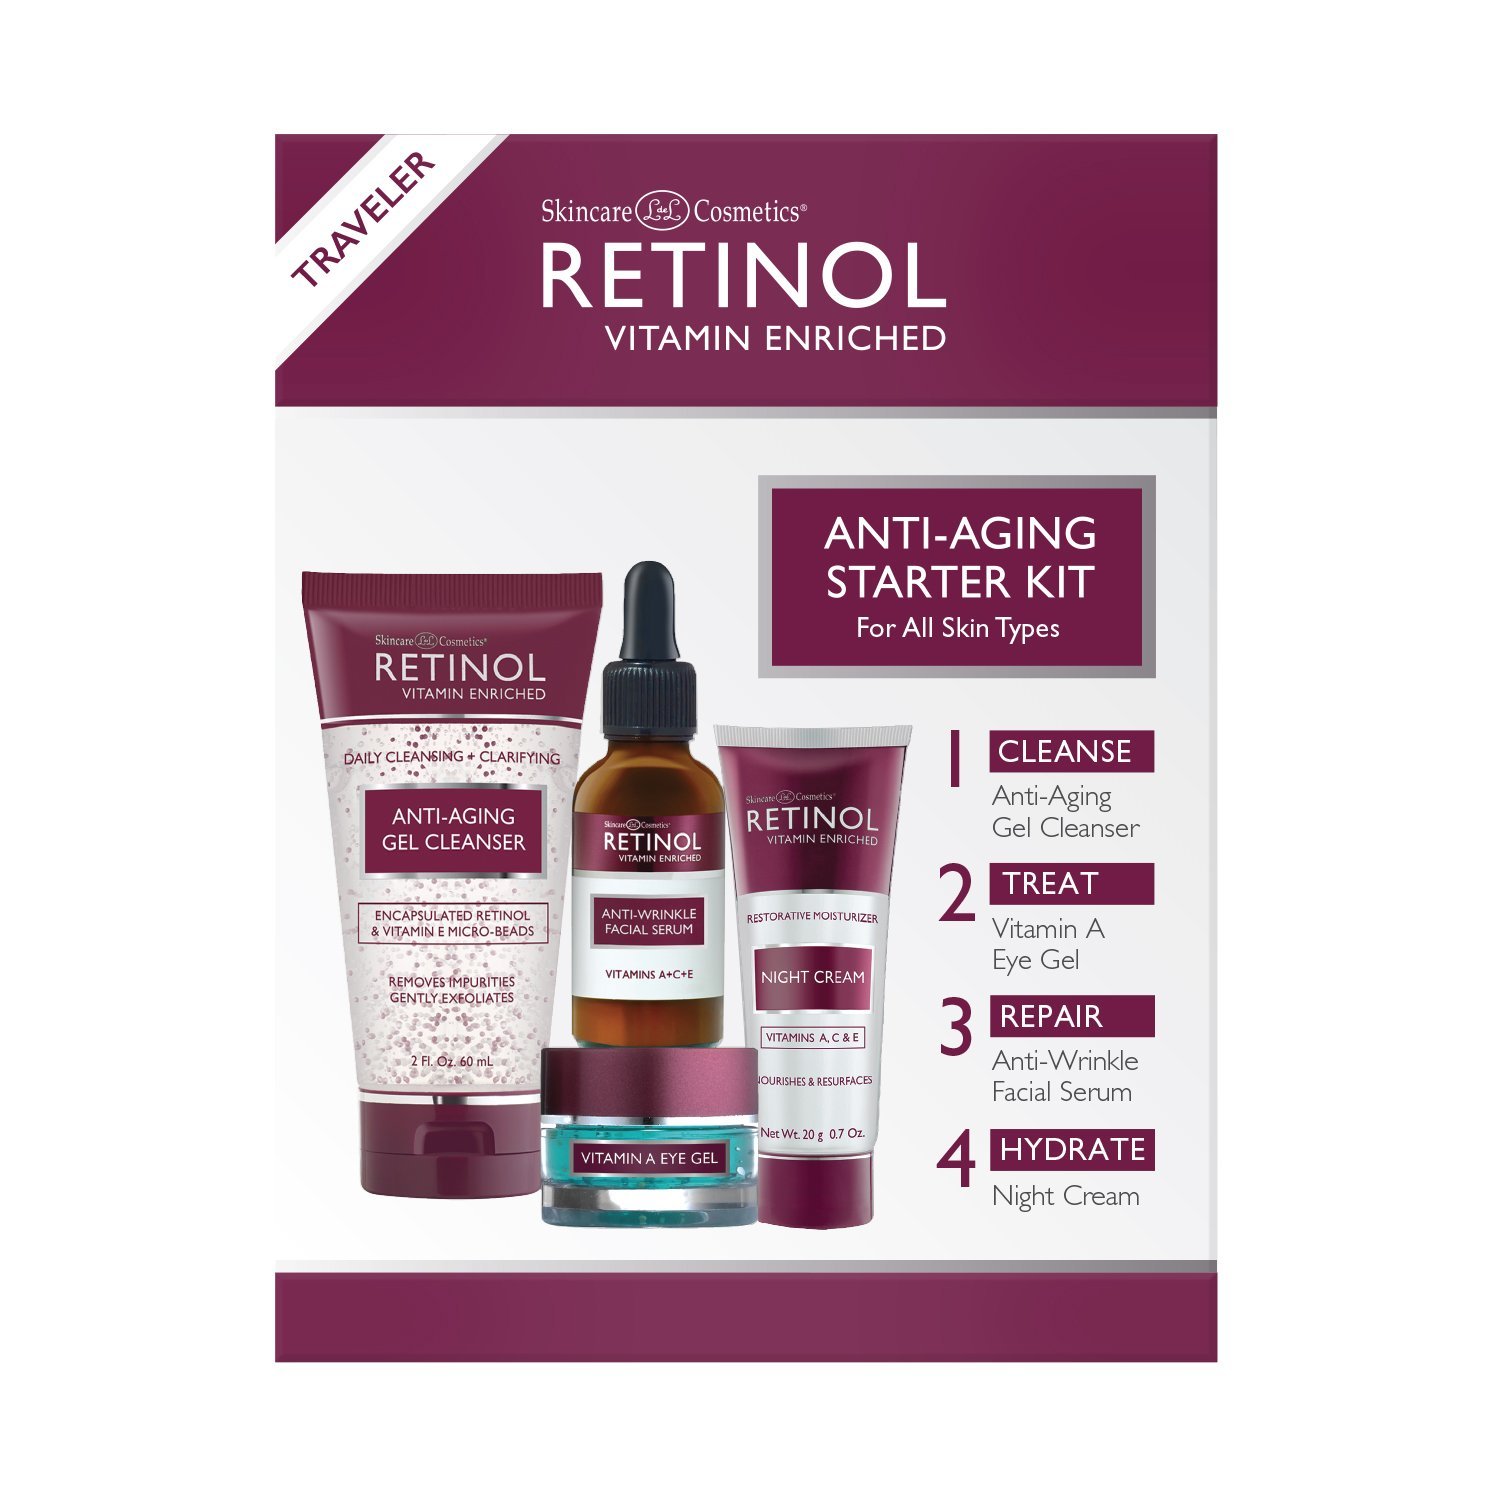 Retinol Anti-Aging Starter Kit – The Original Retinol For a Younger Look – [4] Conveniently Sized Products Perfect For Travel or First Time Try – Cleanse, Treat, Repair  Hydrate On-The-Go